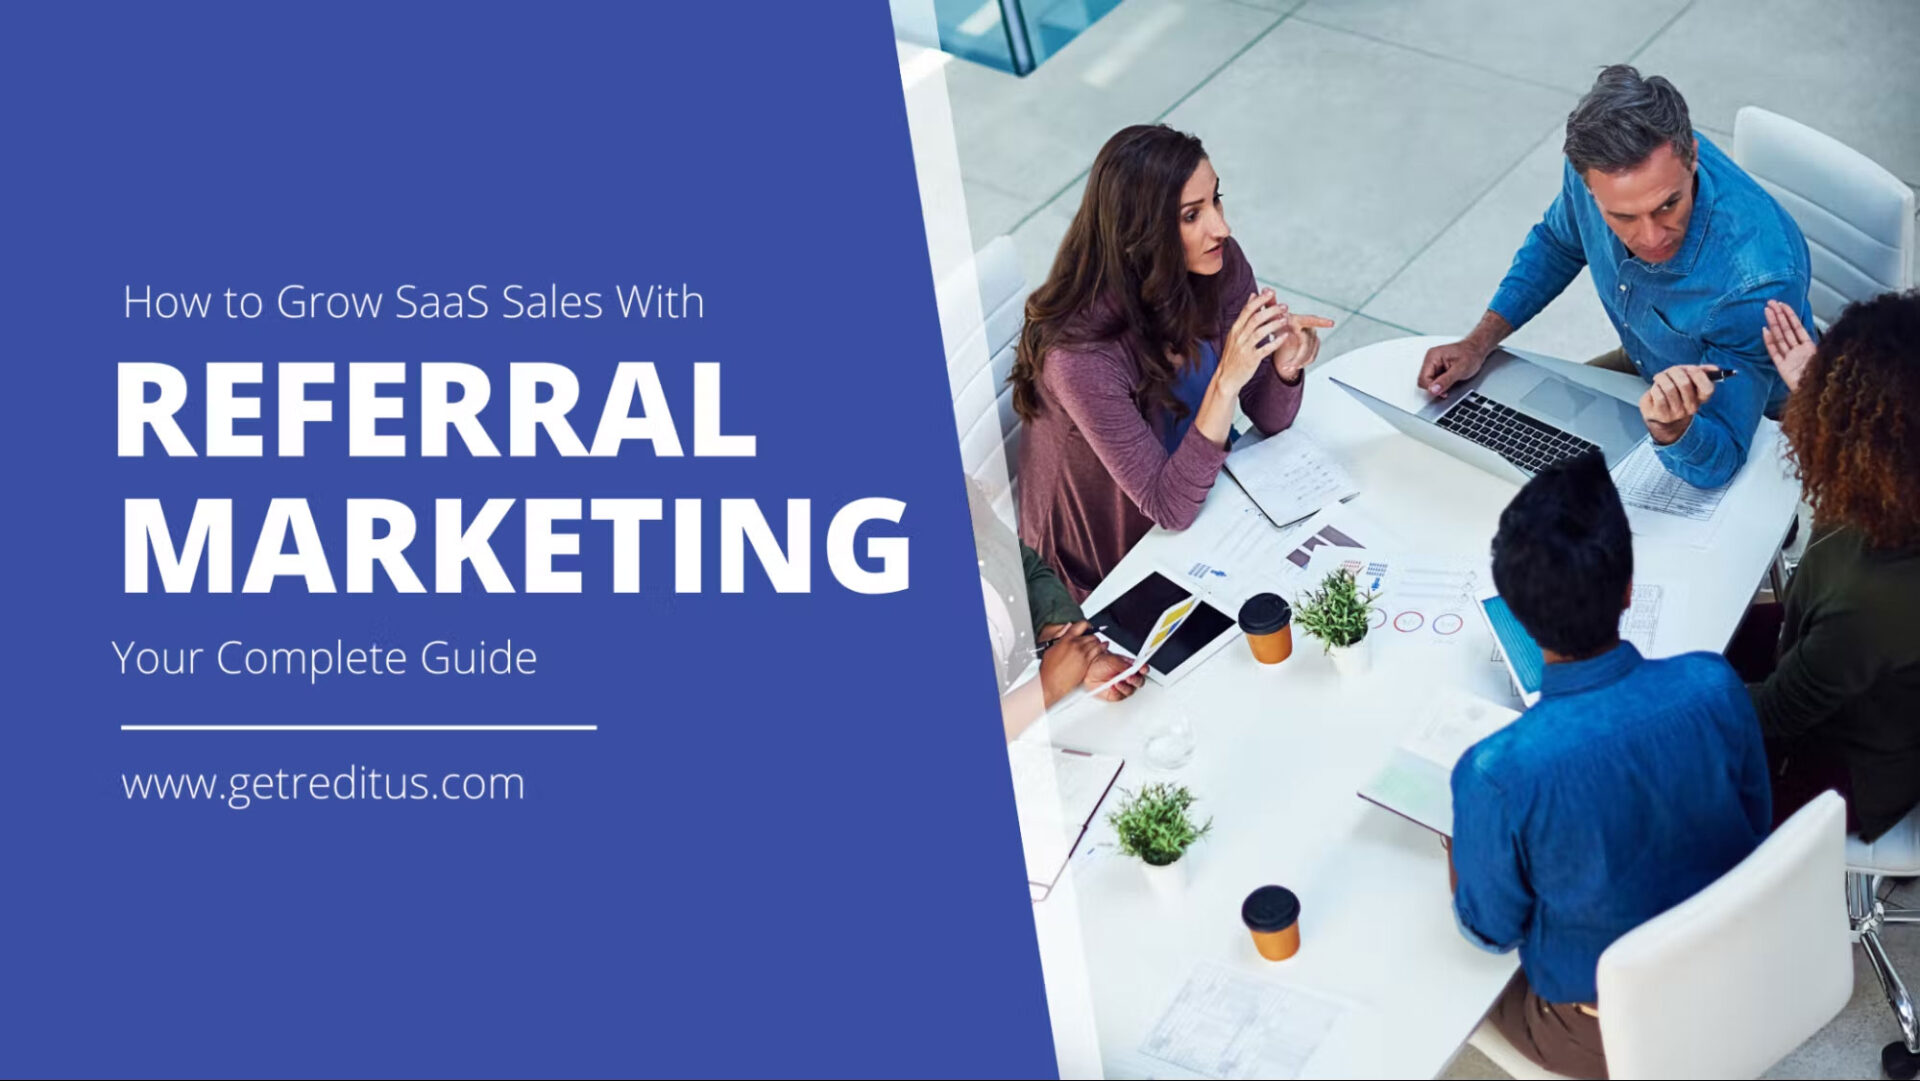 How To Grow SaaS Sales With Referral Marketing